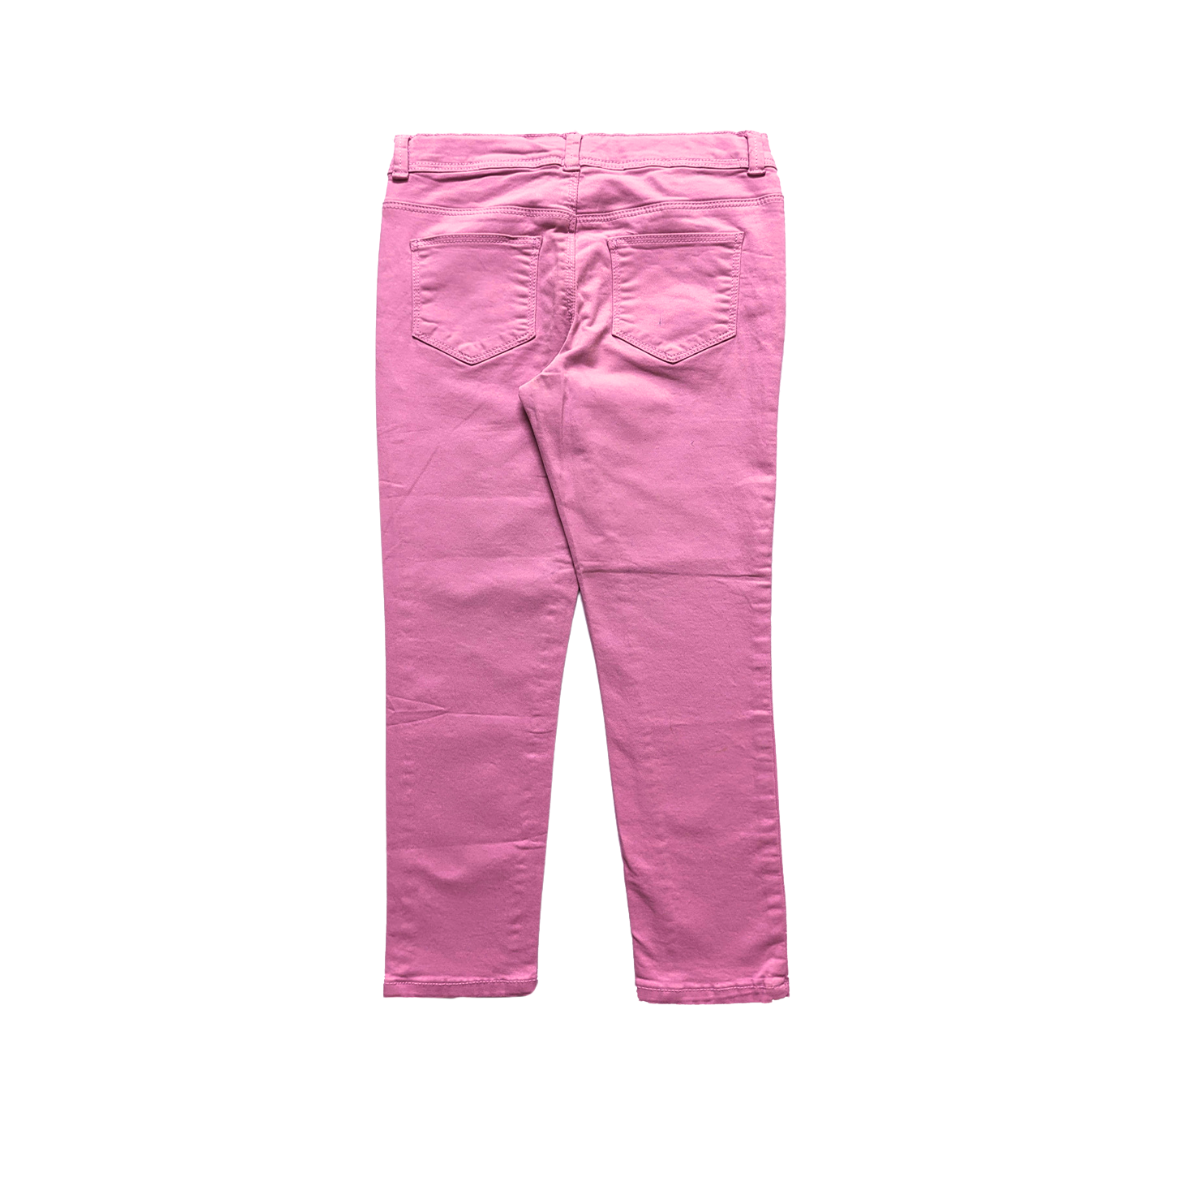 Brand Expo Premium Quality Branded Chino Pant for Girl's